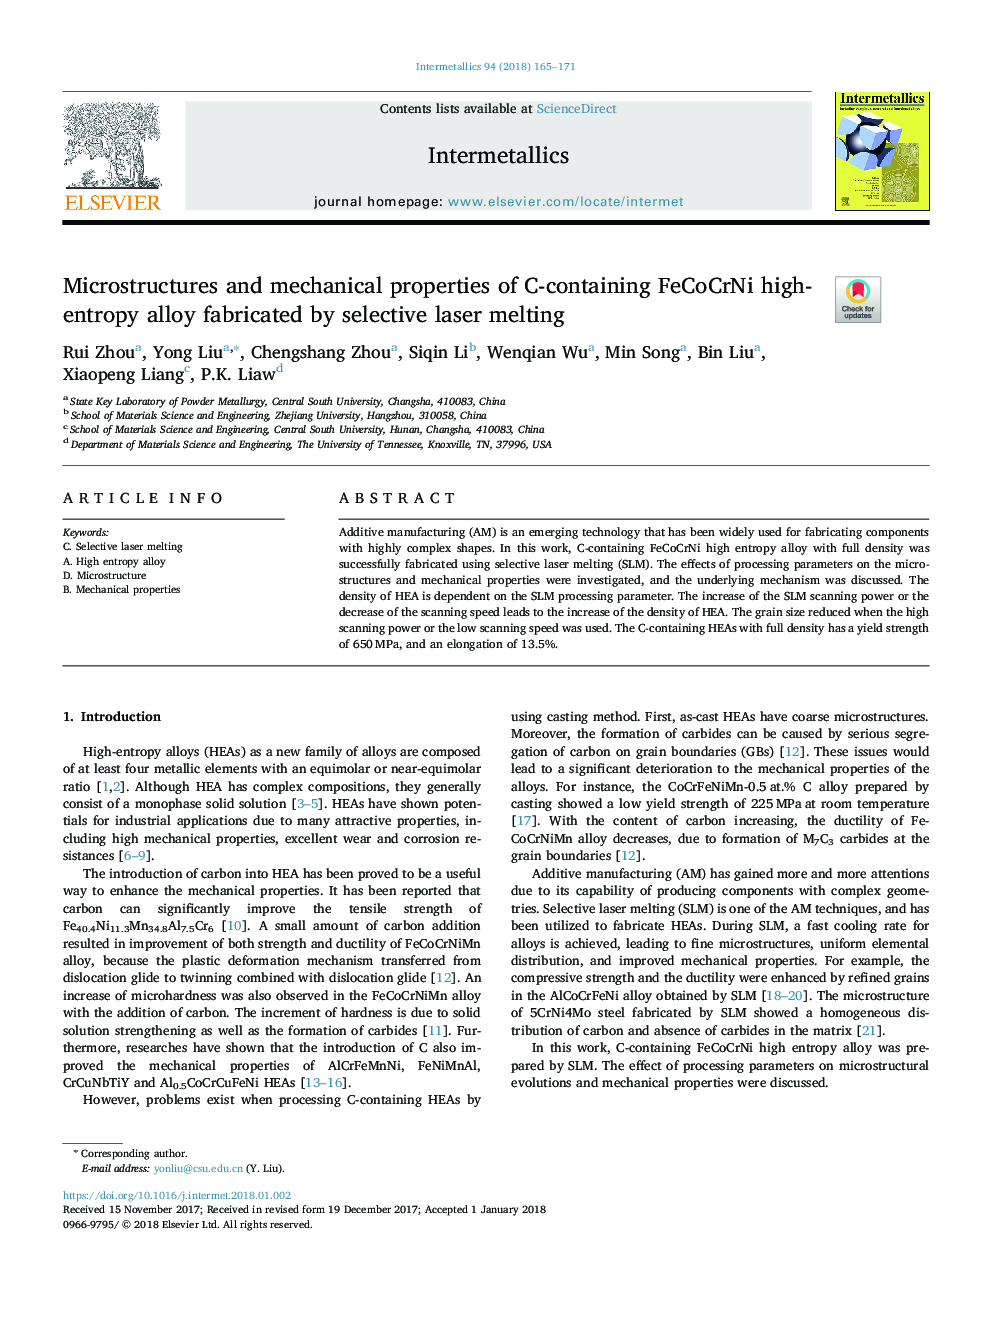 Microstructures and mechanical properties of C-containing FeCoCrNi high-entropy alloy fabricated by selective laser melting